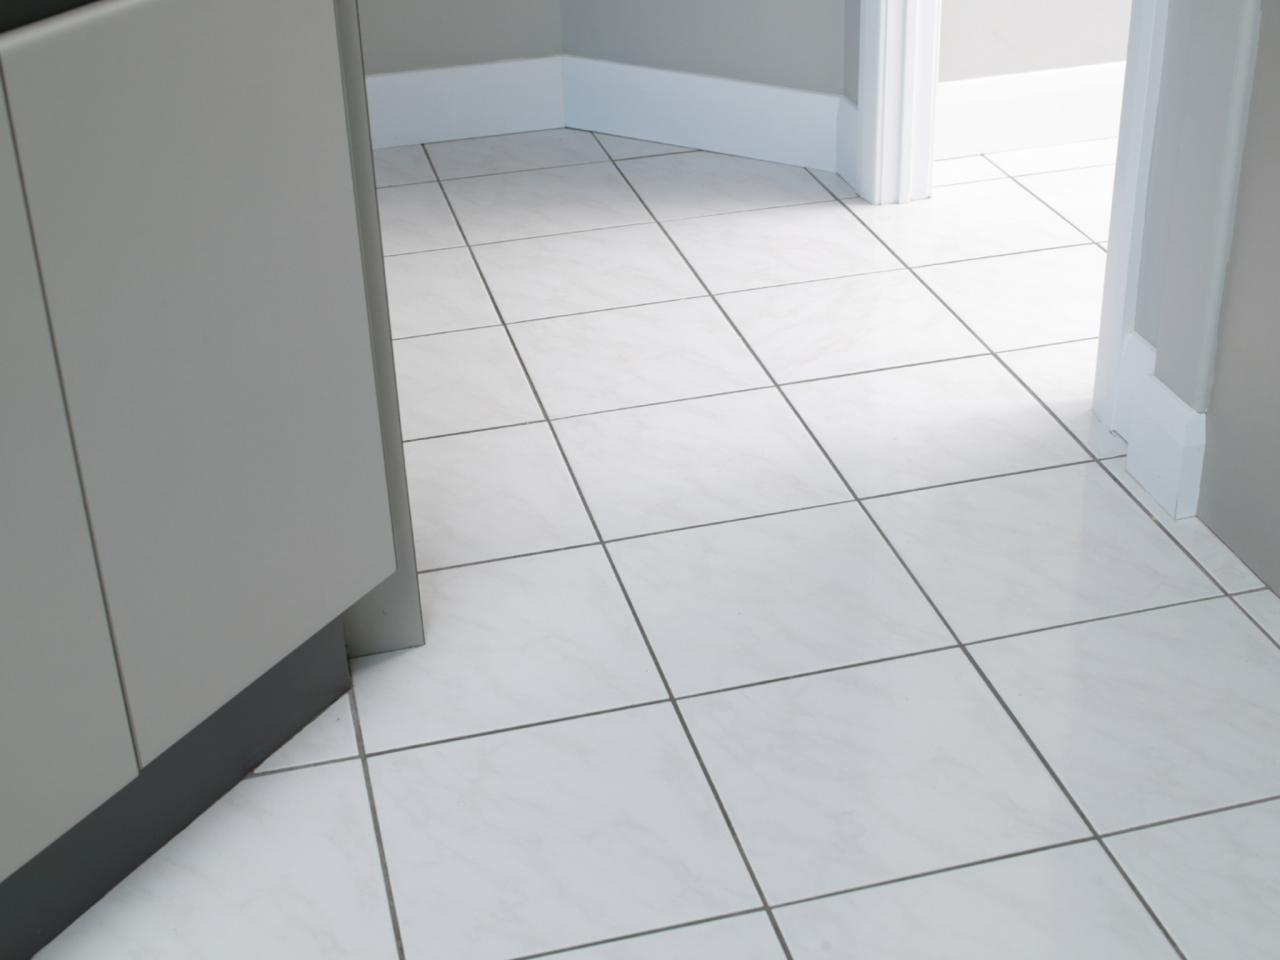 How To Keep Ceramic Tile Grout In Good, Best Way To Clean Ceramic Tile Floors And Grout